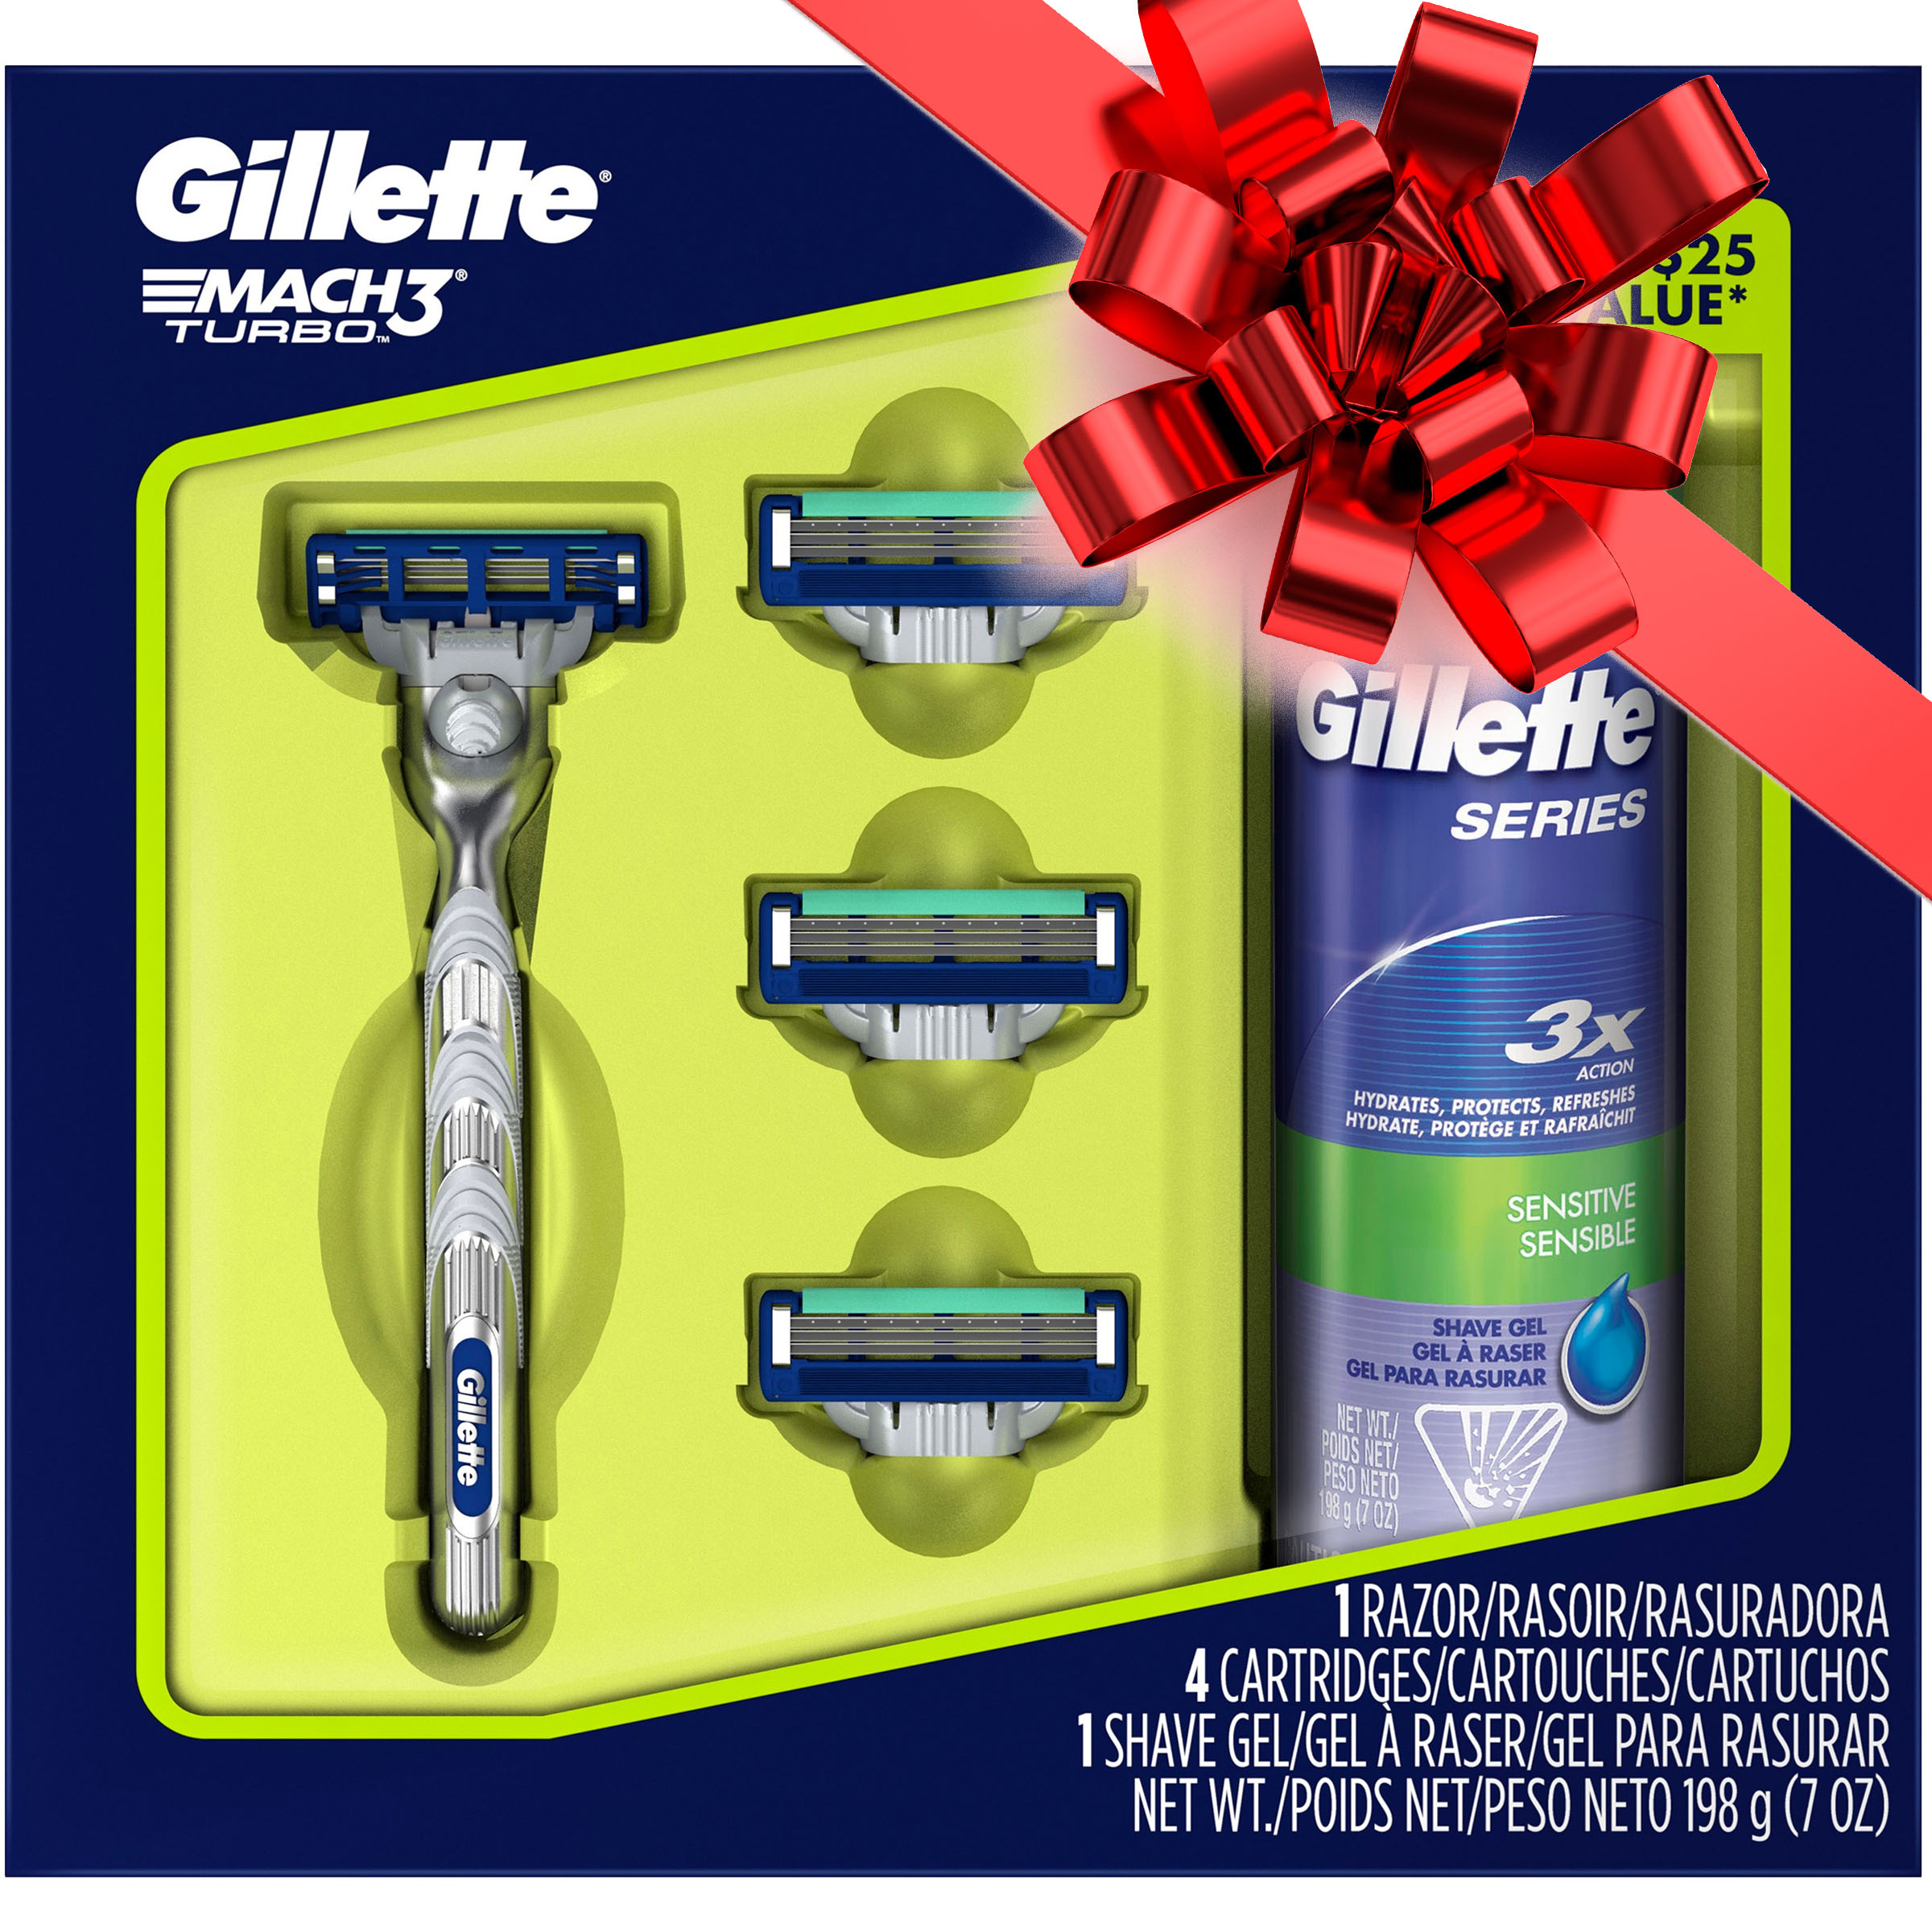 Gillette Mach3 Turbo Razor, Shave Gel and 4 Blade Refills Gift Pack - image 1 of 8